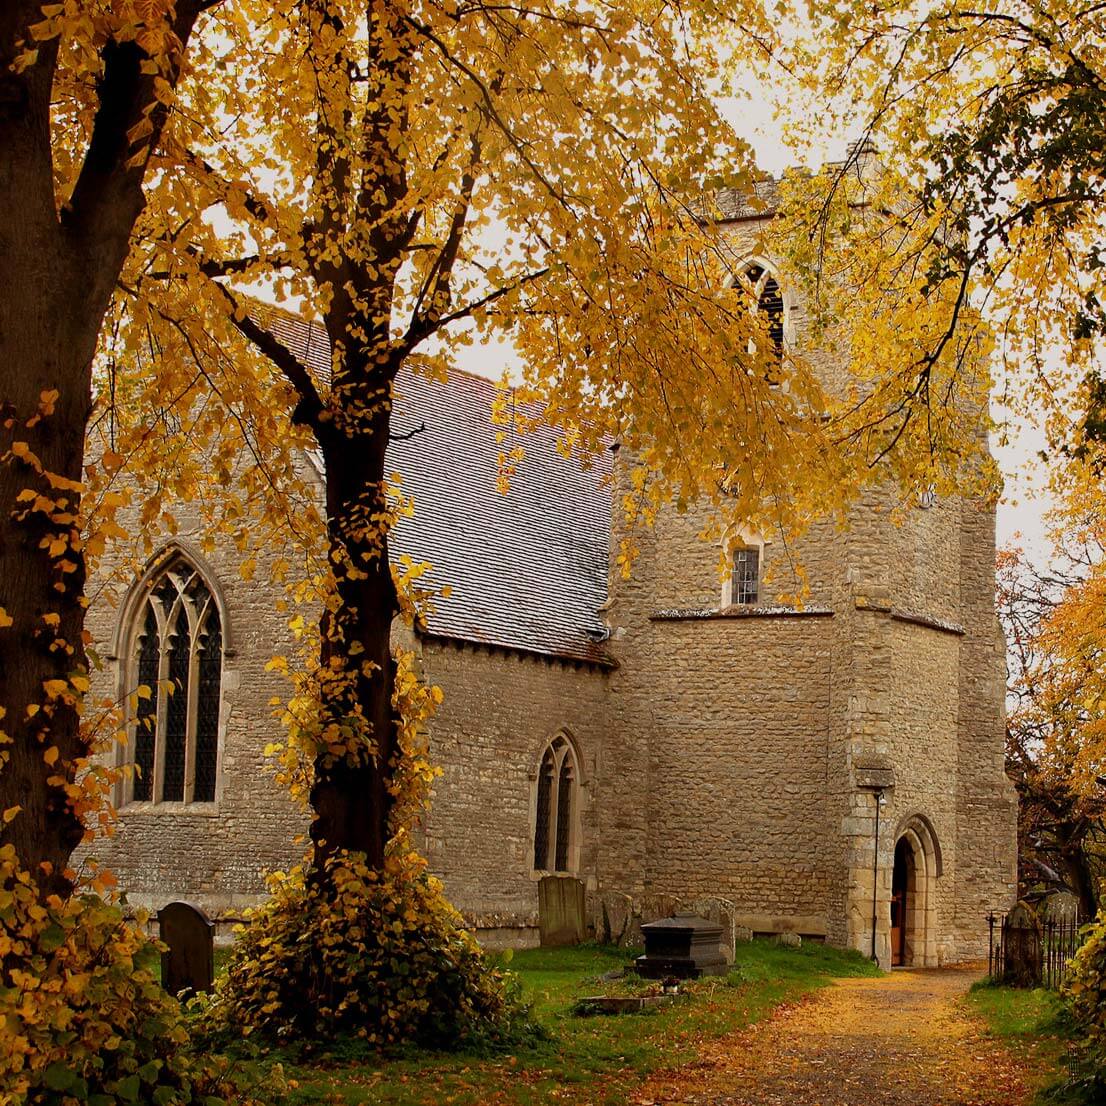 St. Catherine's Church in Towersey among autumn leaves